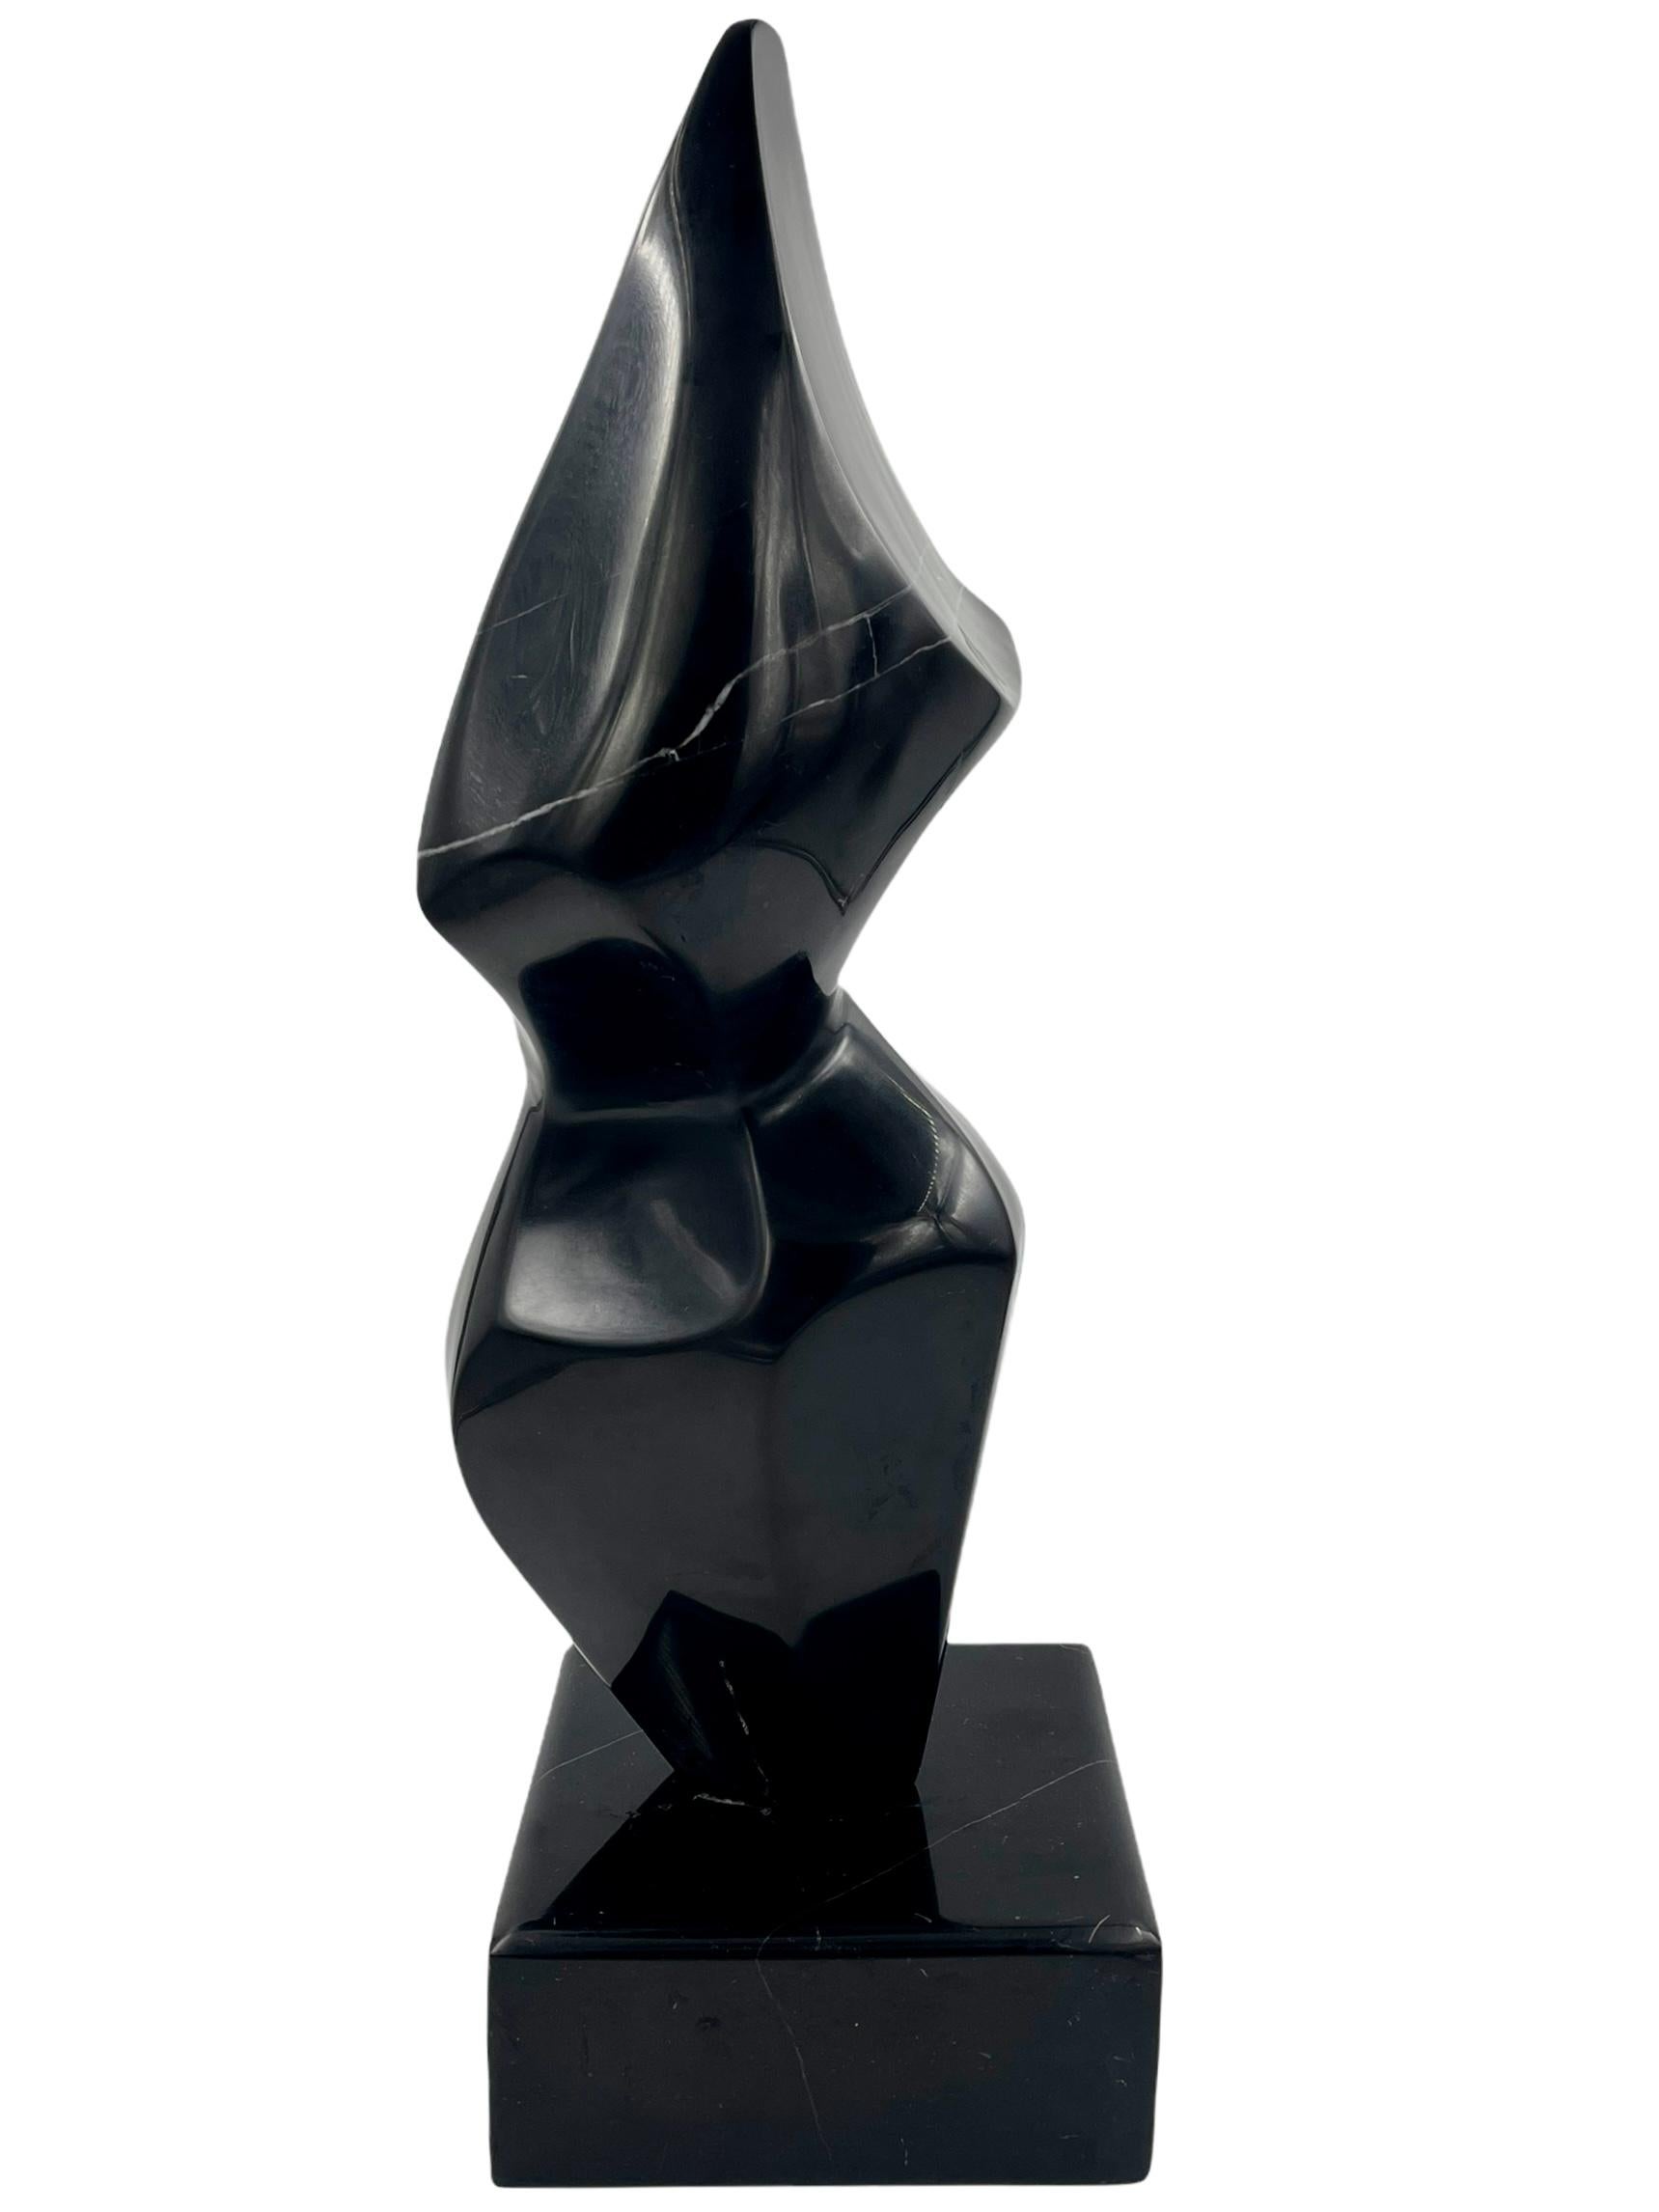 Abstract marble sculpture. Unique polished pink black abstract sculpture with a matching base. This beautiful one of a kind sculpture would make a great art piece to add some sophistication to your home or office.

Measures: 18